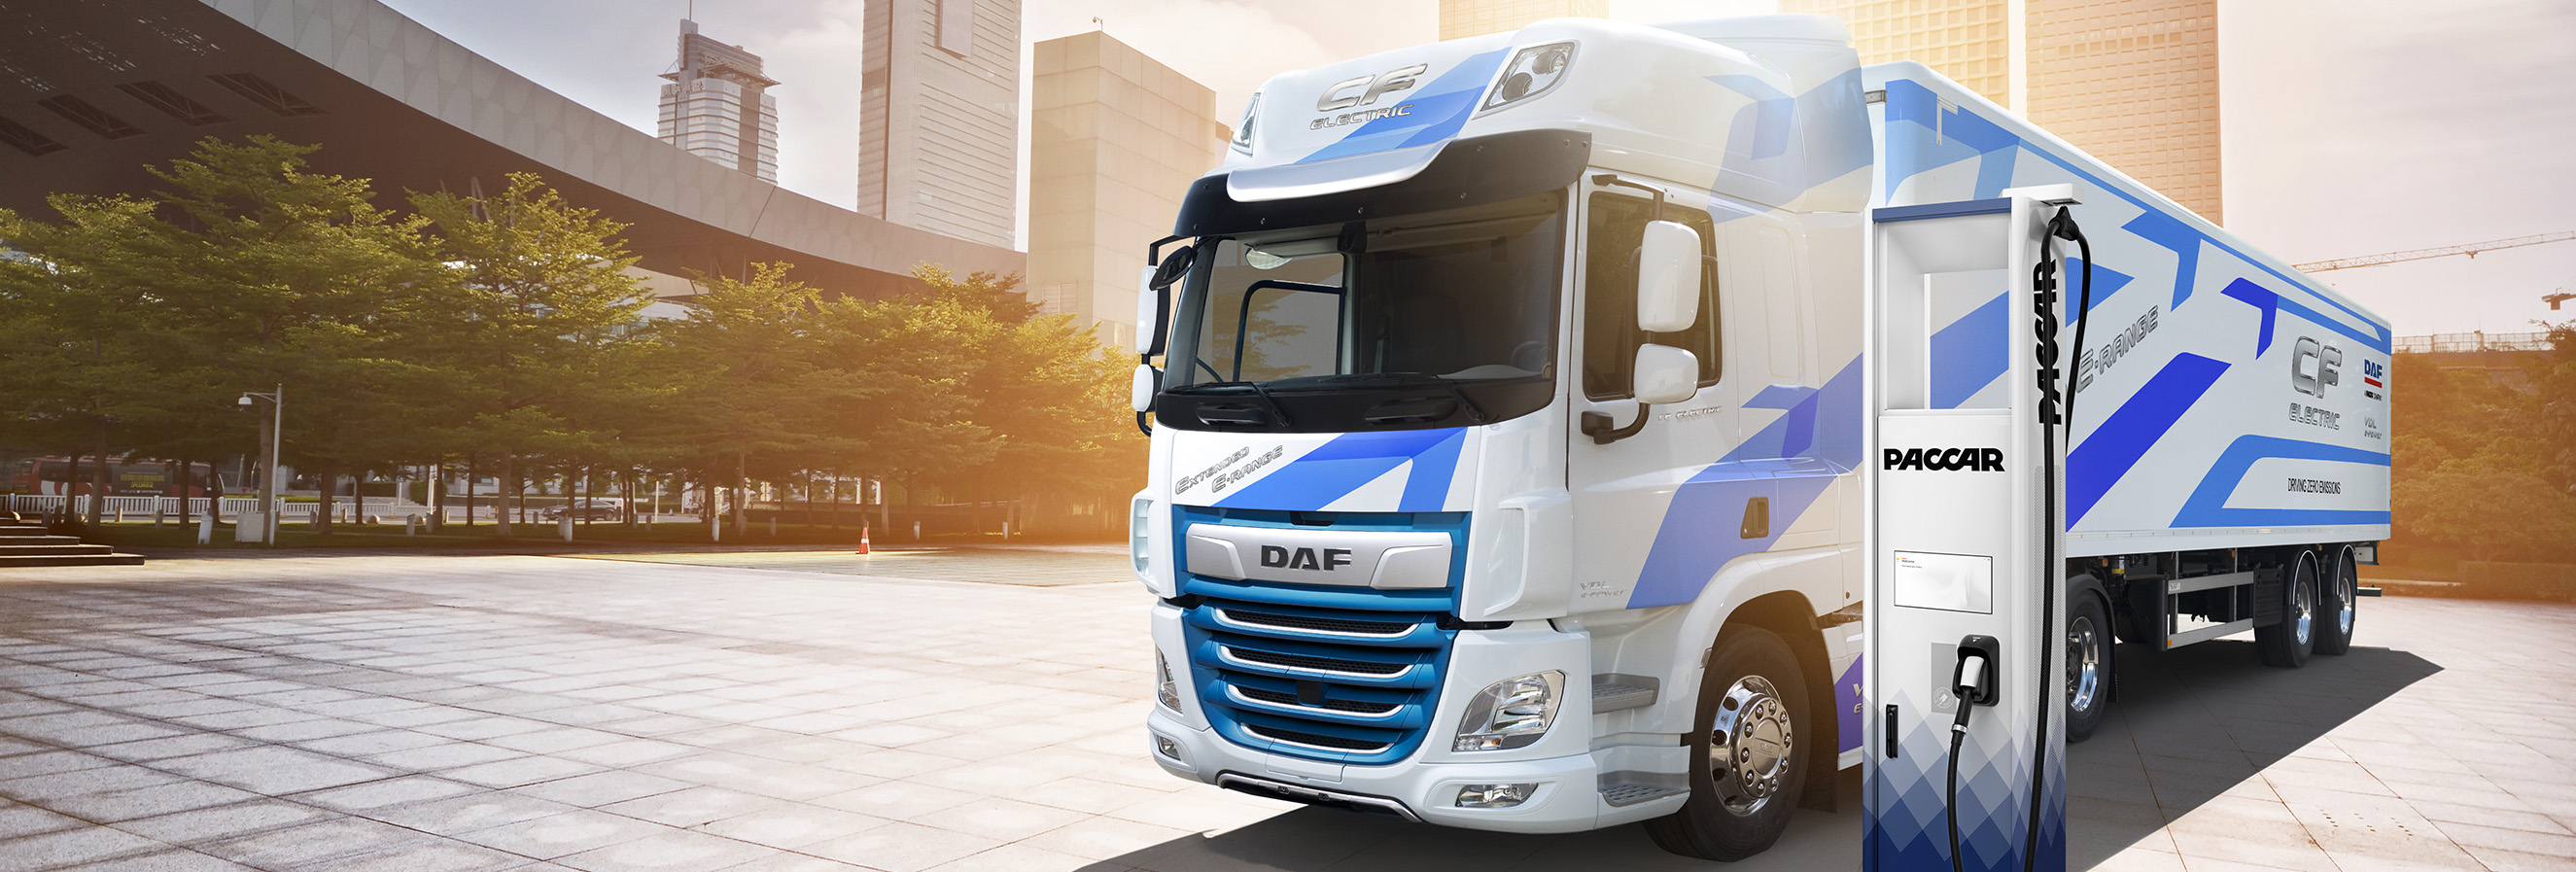 DAF-Electric-truck-and-charger